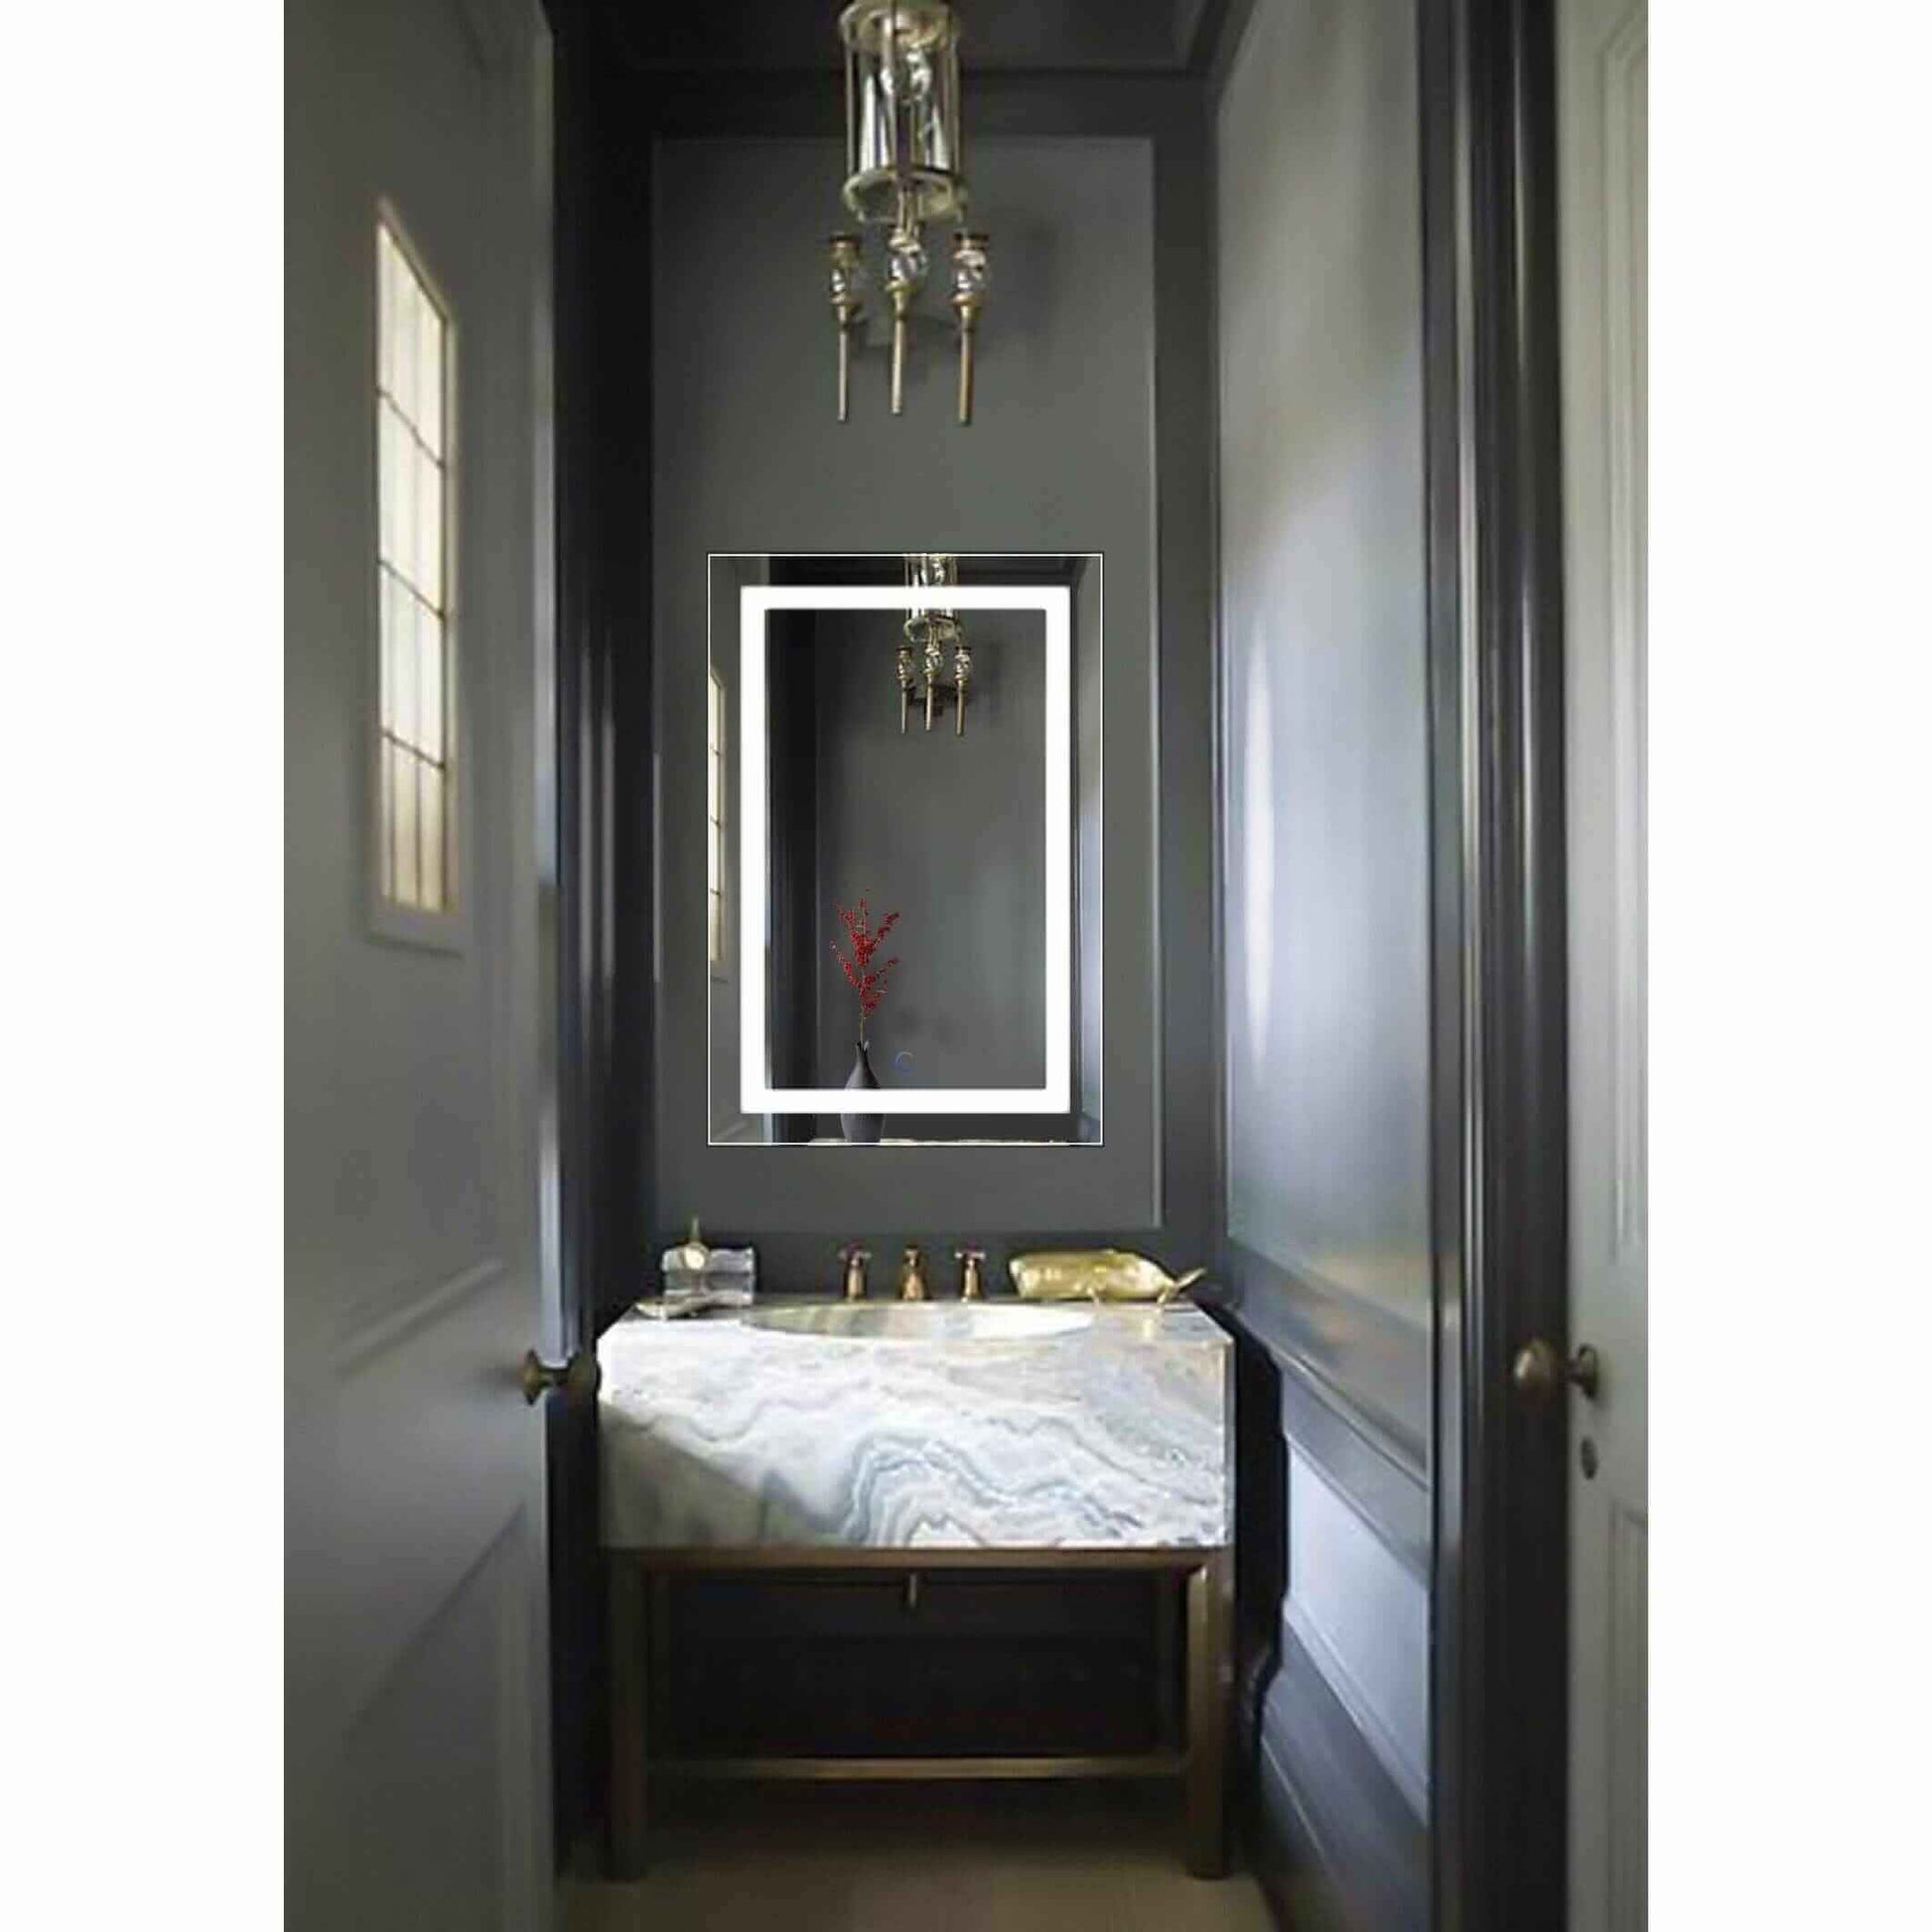 Krugg Icon 2436 Lighted Bathroom Mirror with defogger and dimmer over dark vanity